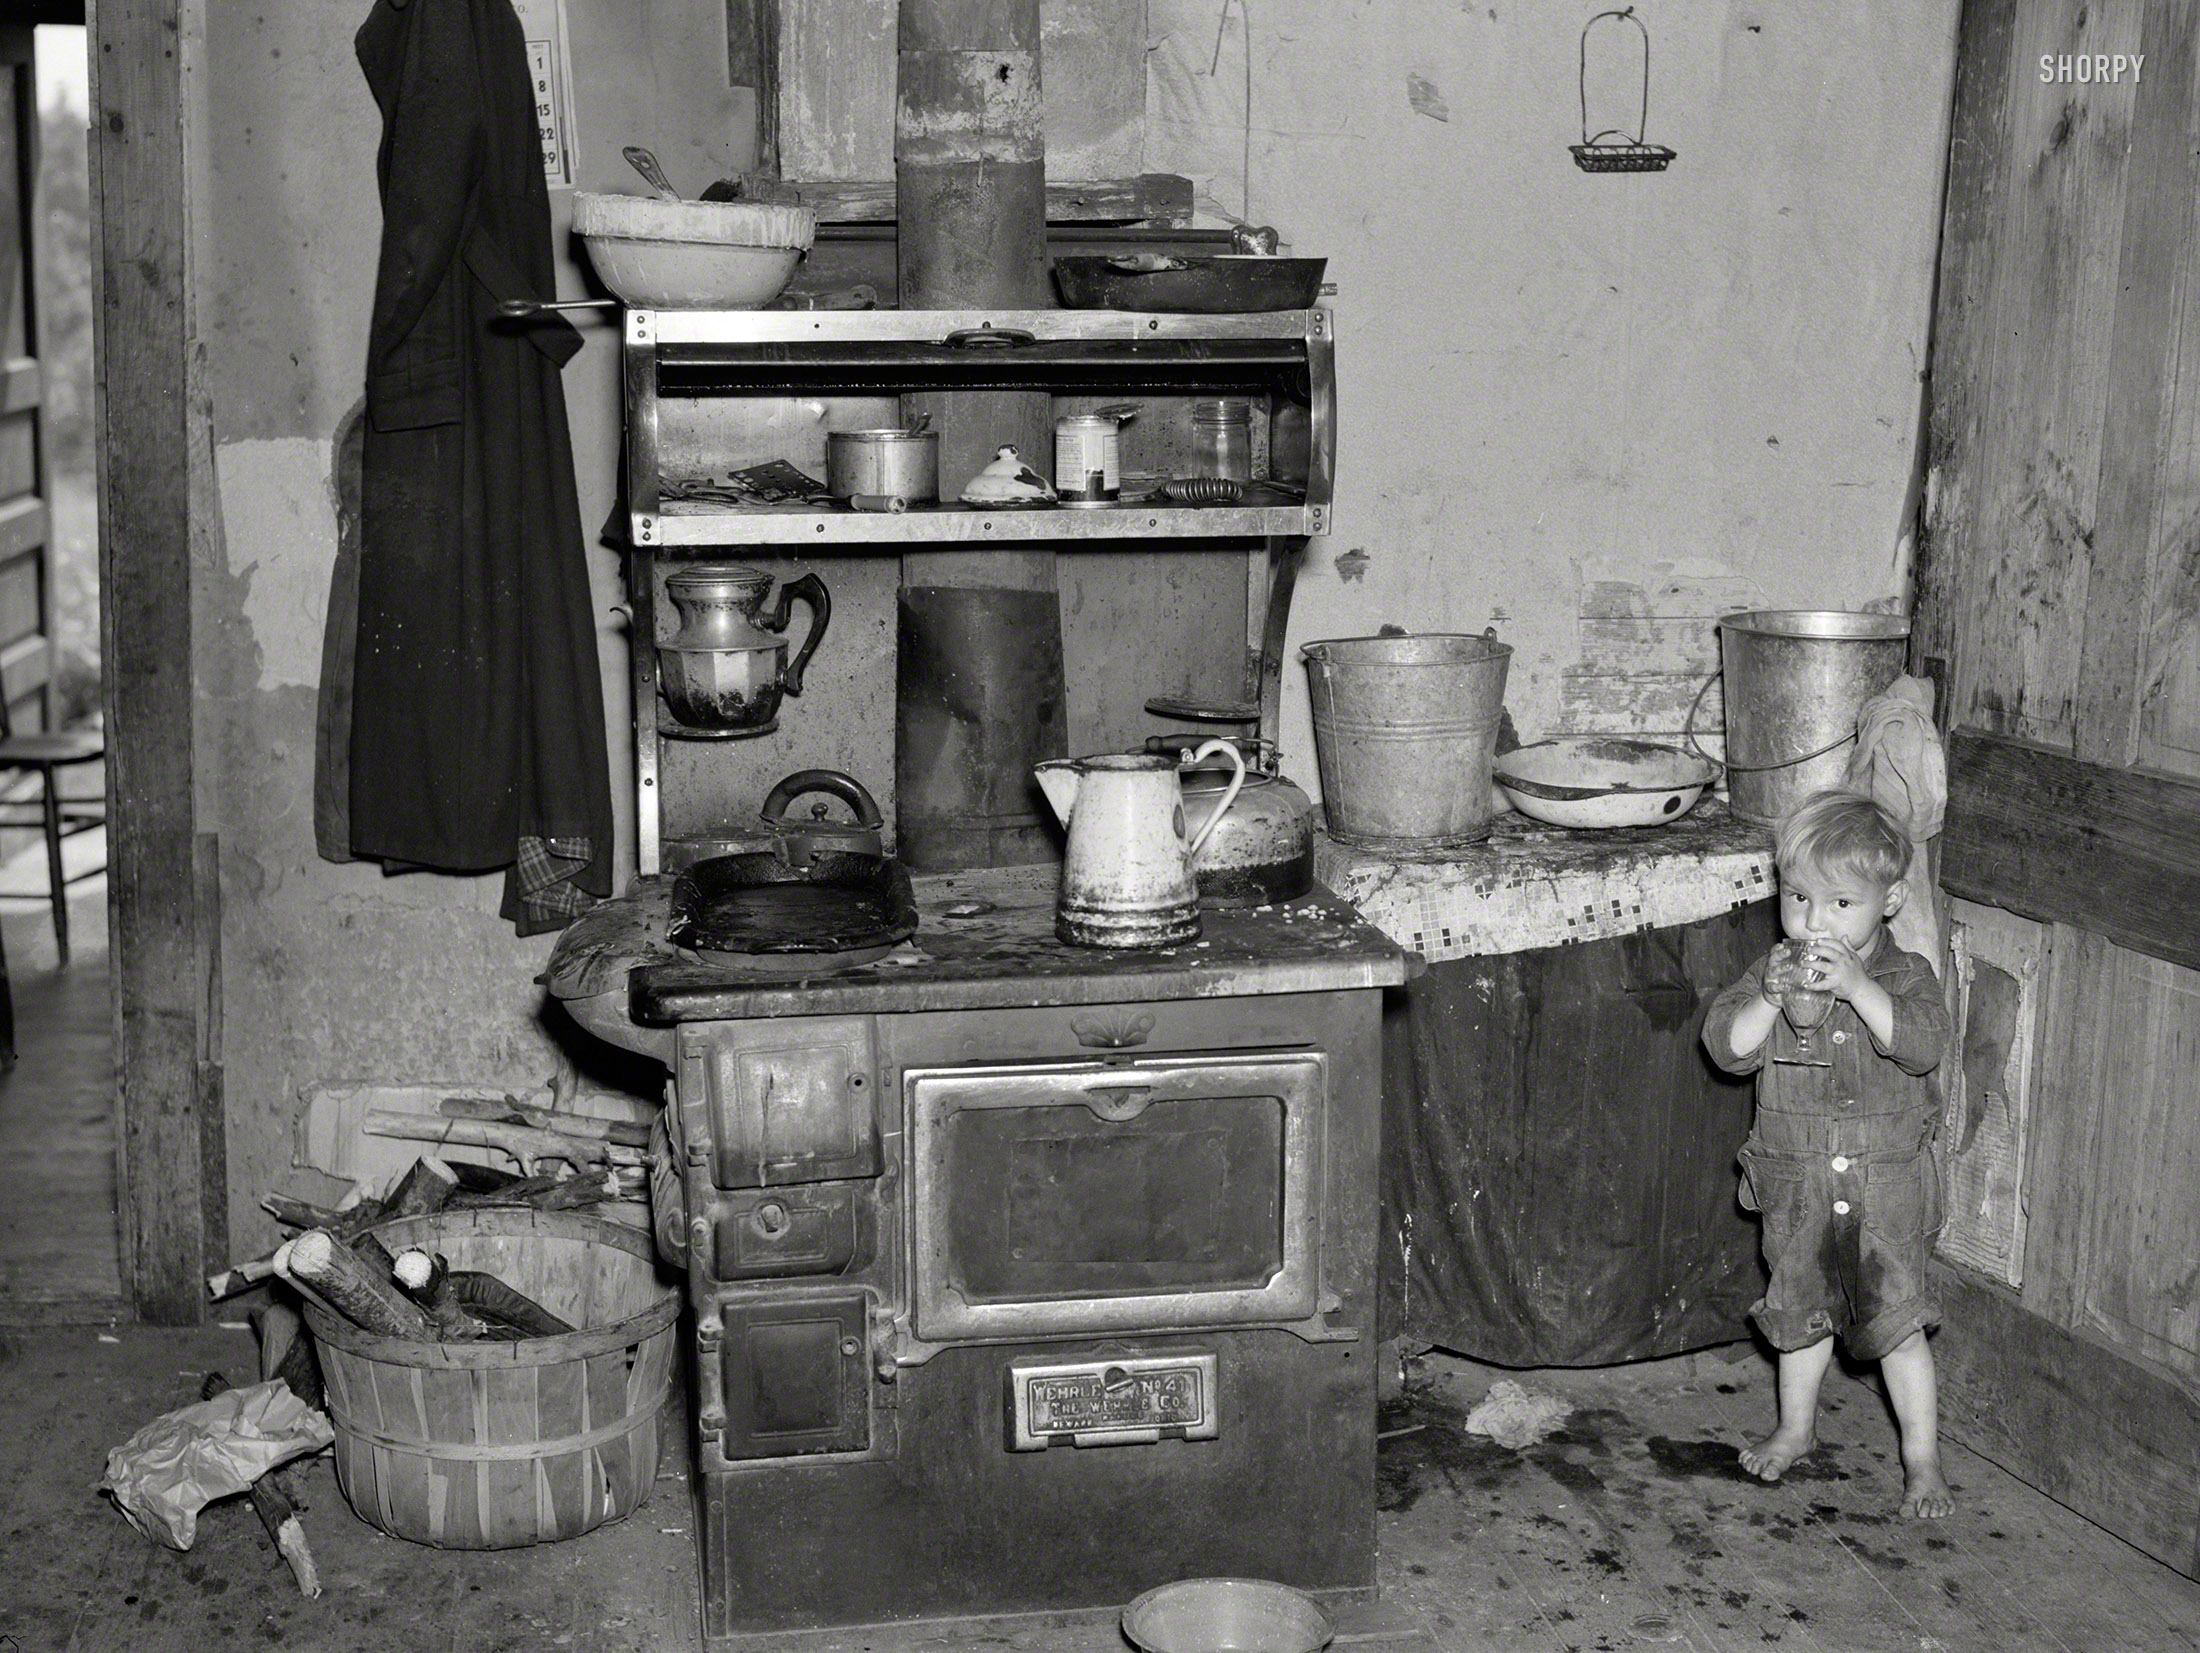 June 1937. "Child of Earl Taylor in kitchen of their home near Black River Falls, Wisconsin." Photo by Russell Lee, Resettlement Administration. View full size.